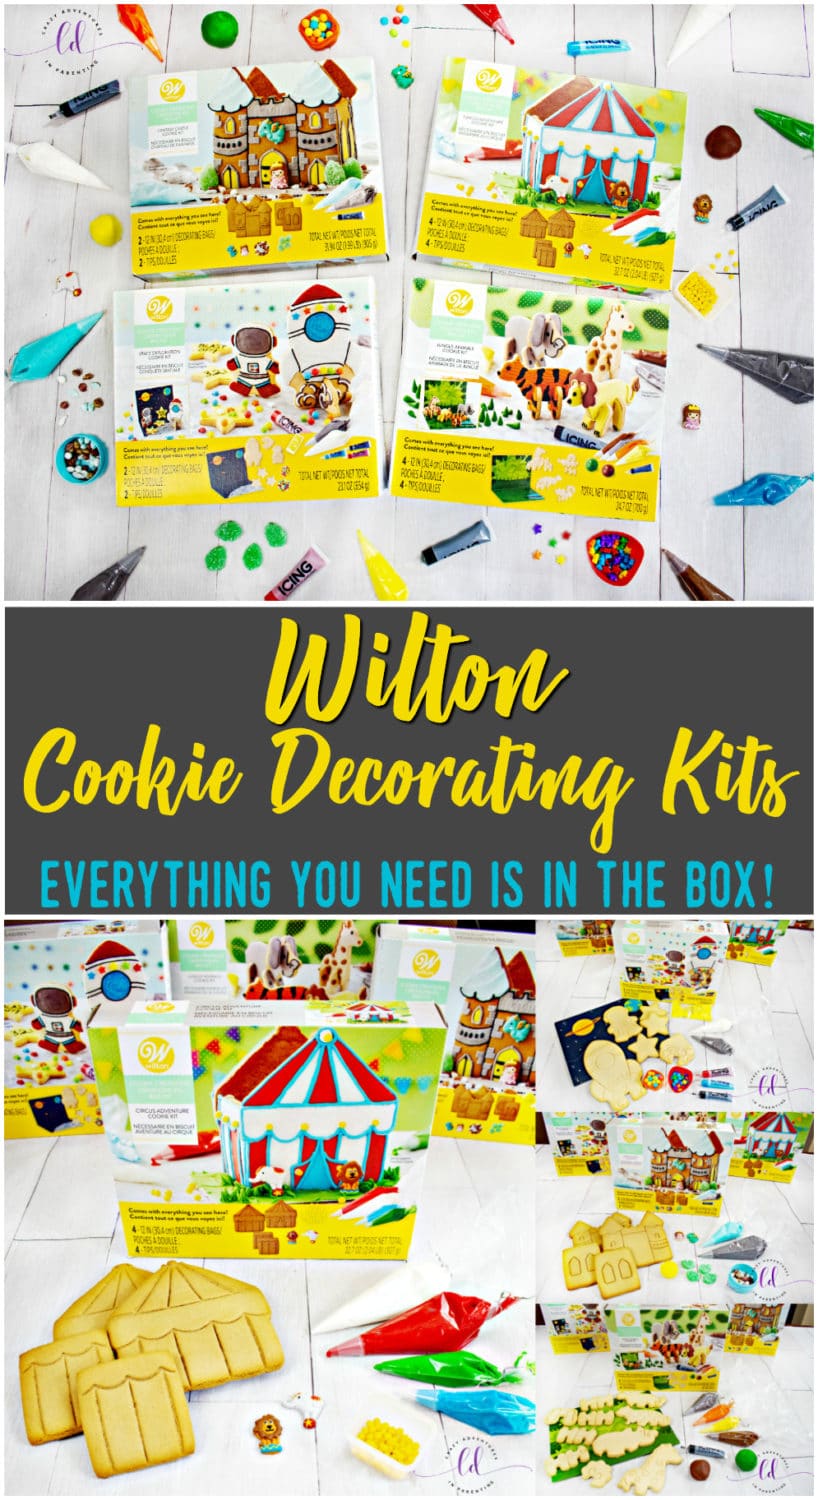 Wilton Cookie Decorating Kits - Everything You Need Is In The Box